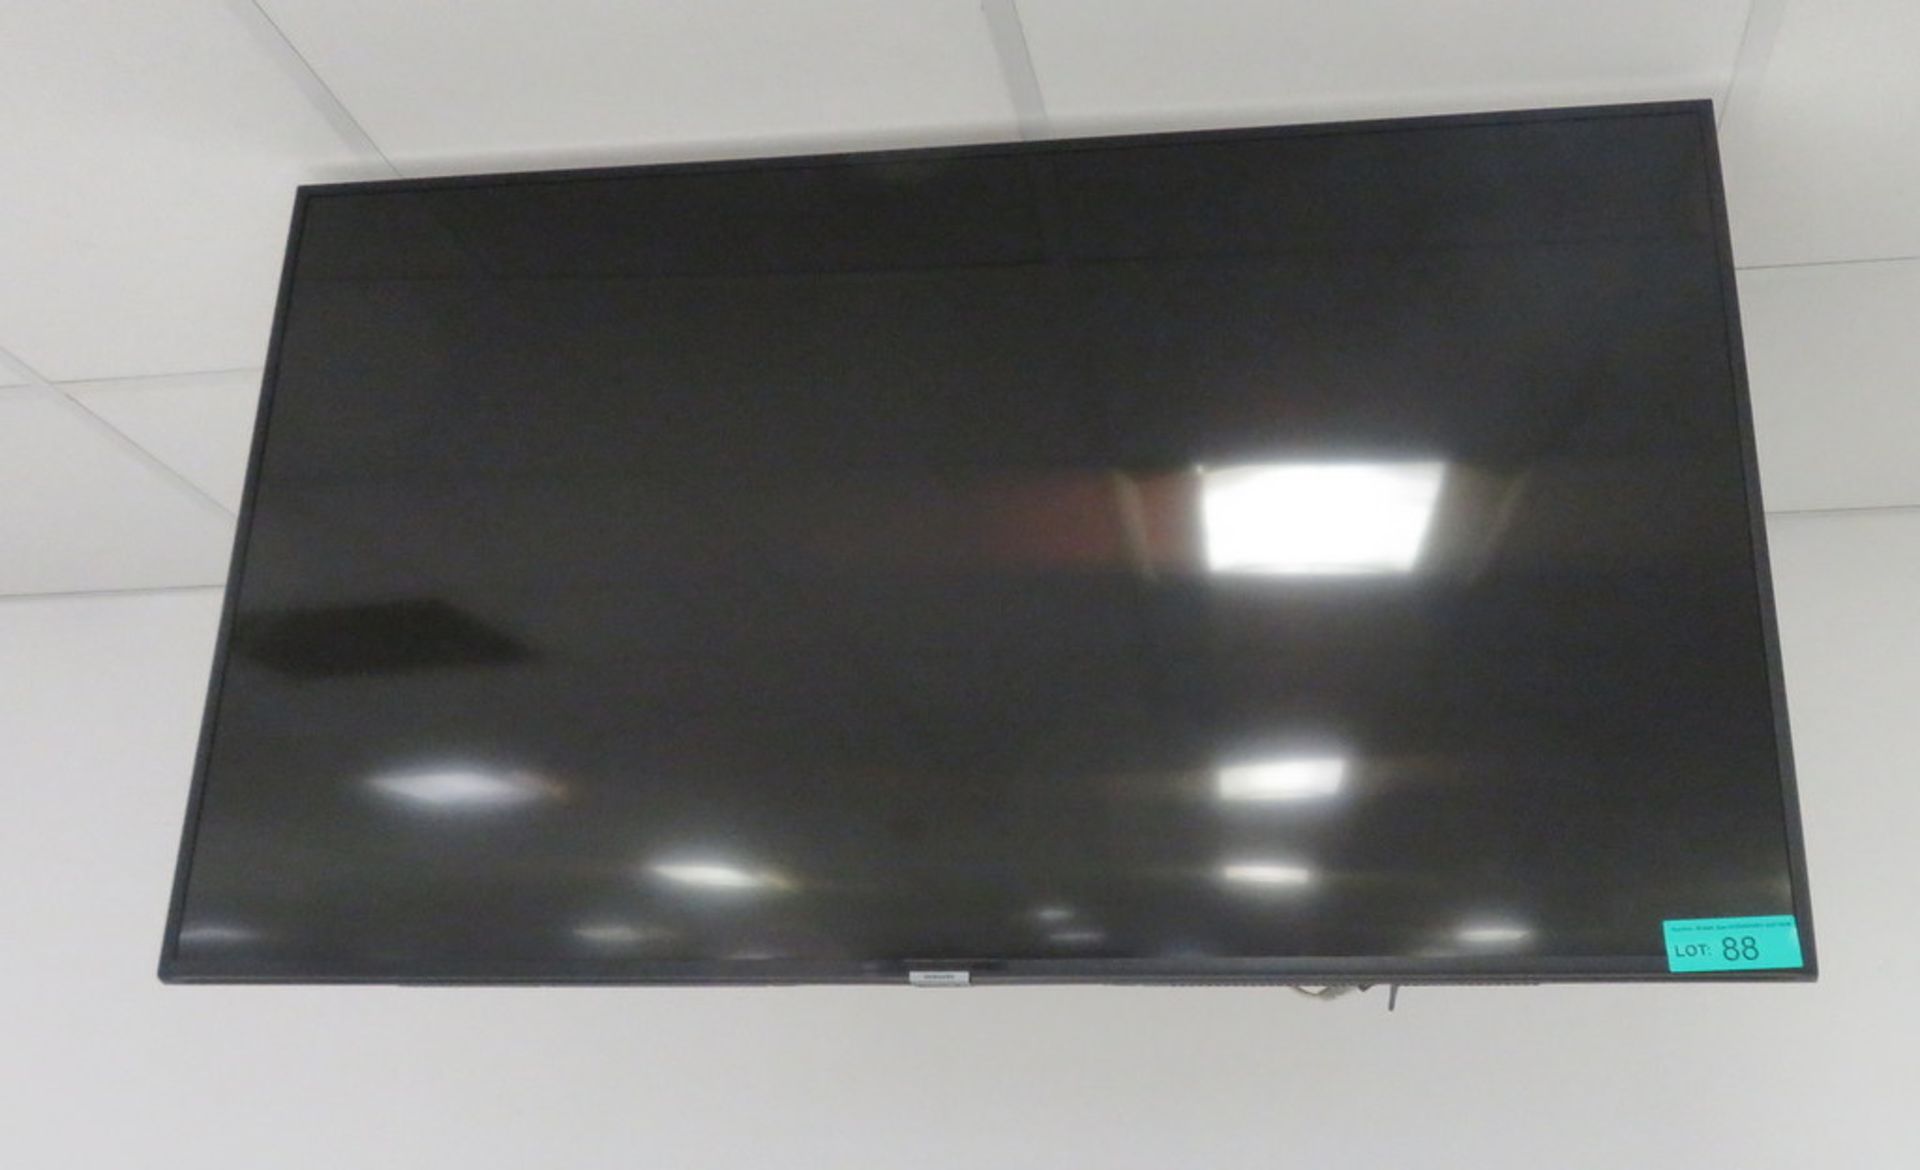 Samsung HG55E 55" TV. Please Note There Is No Stand And The Wall Mount Is Not Included.